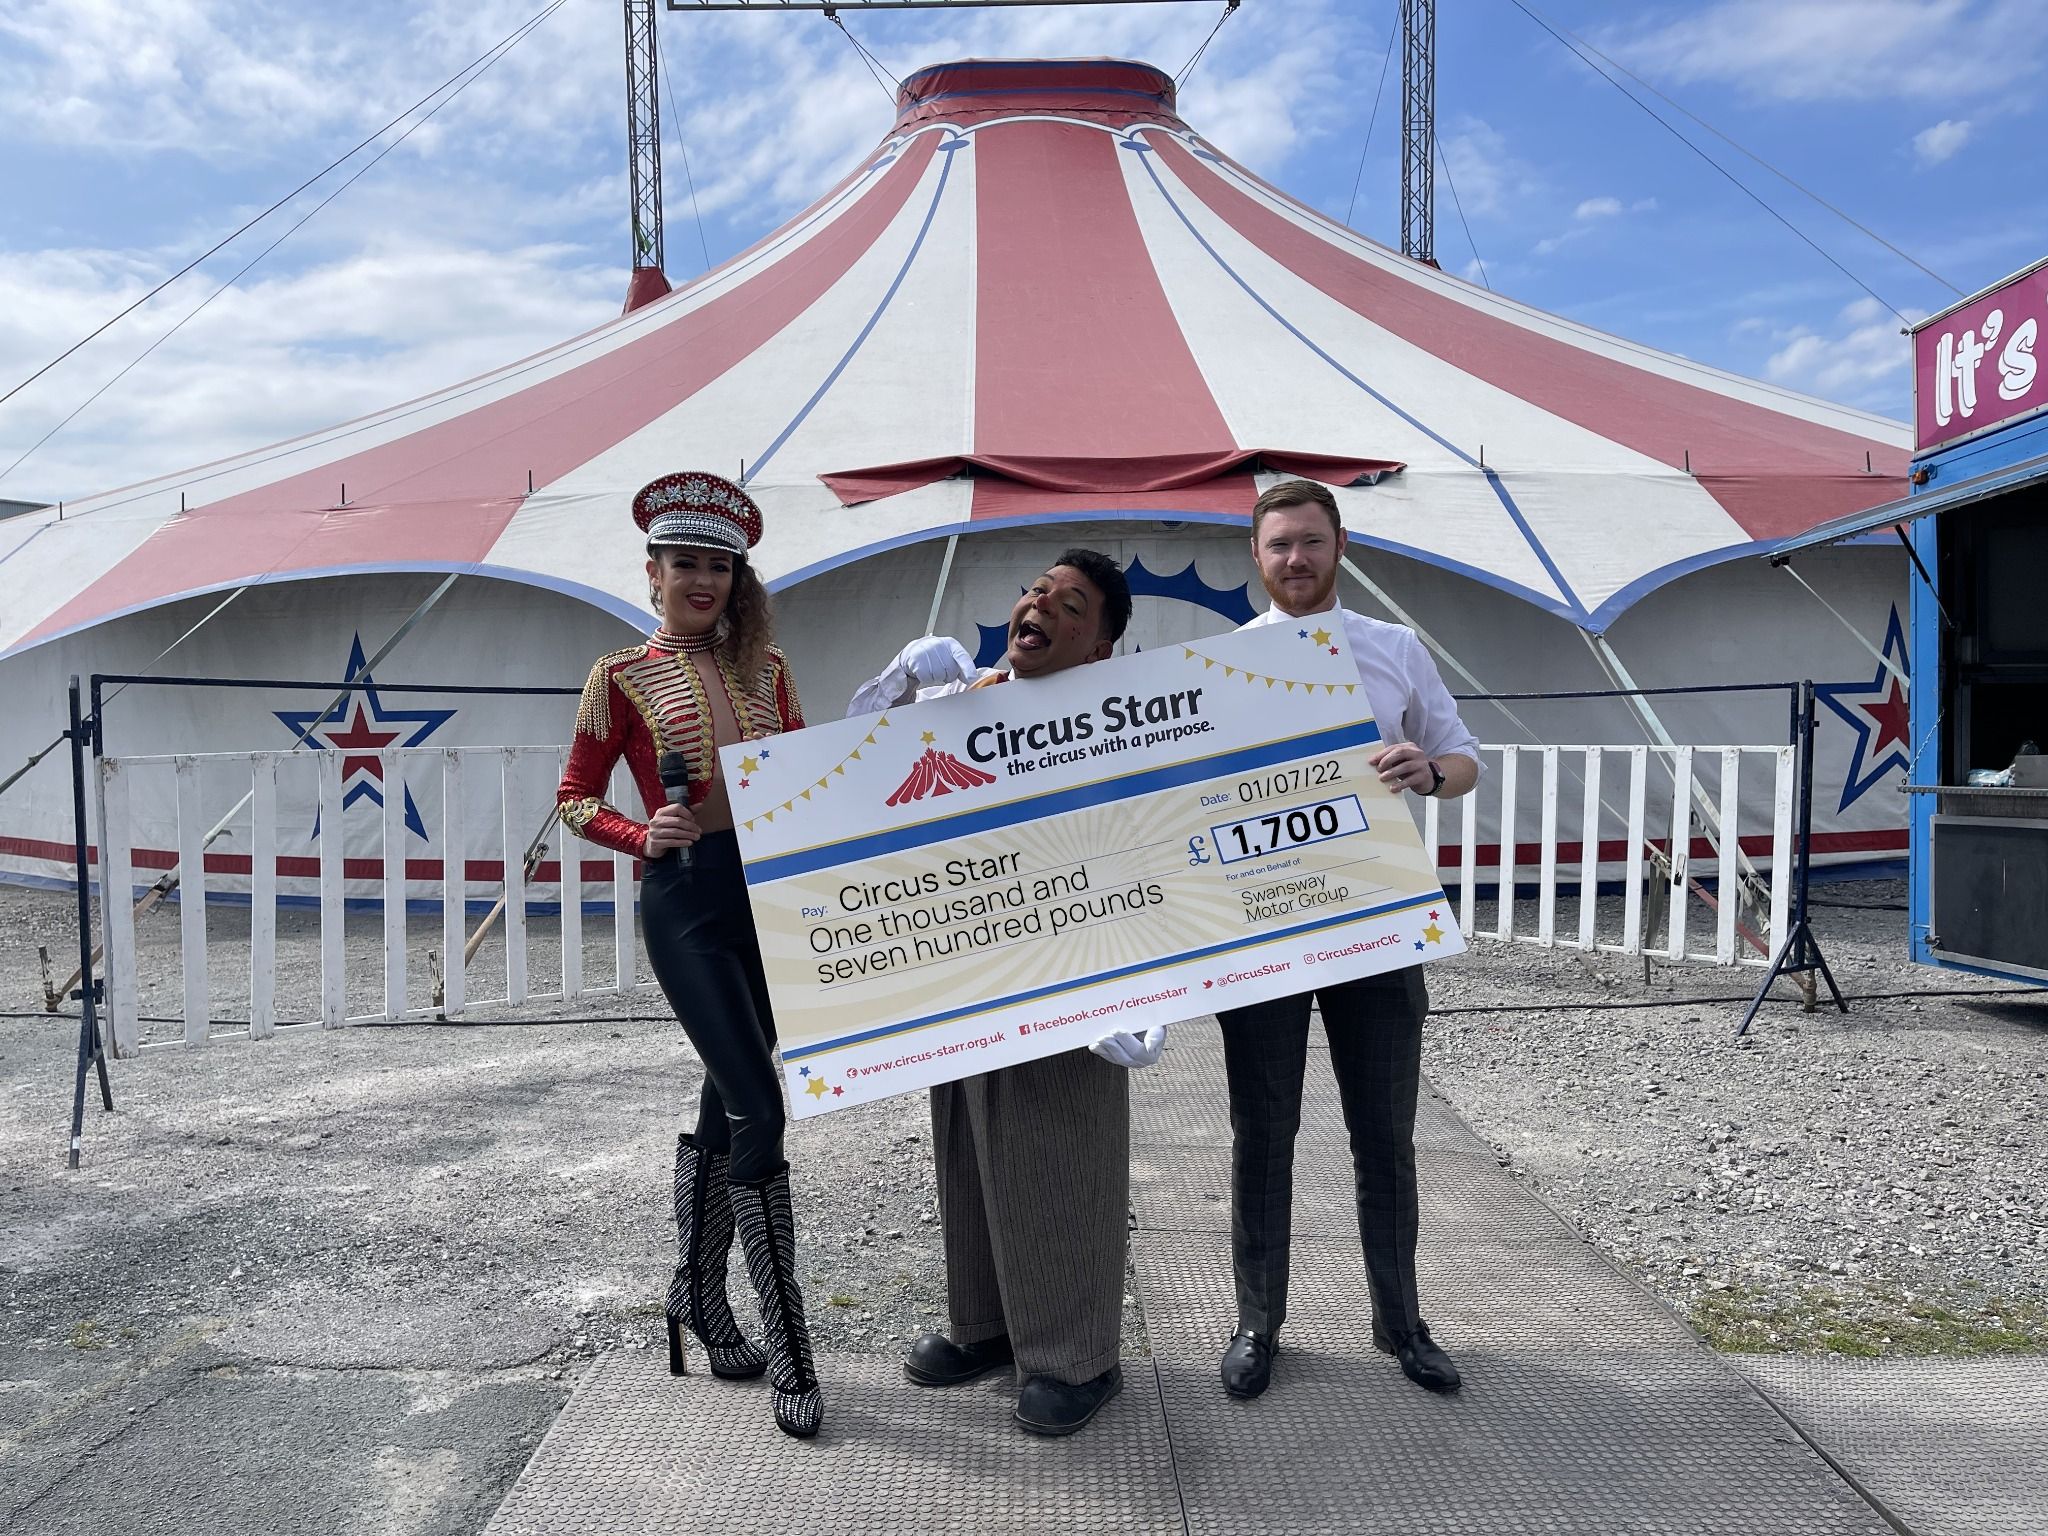 Swansway Motor Group visit Circus Starr  show with the latest donation. image